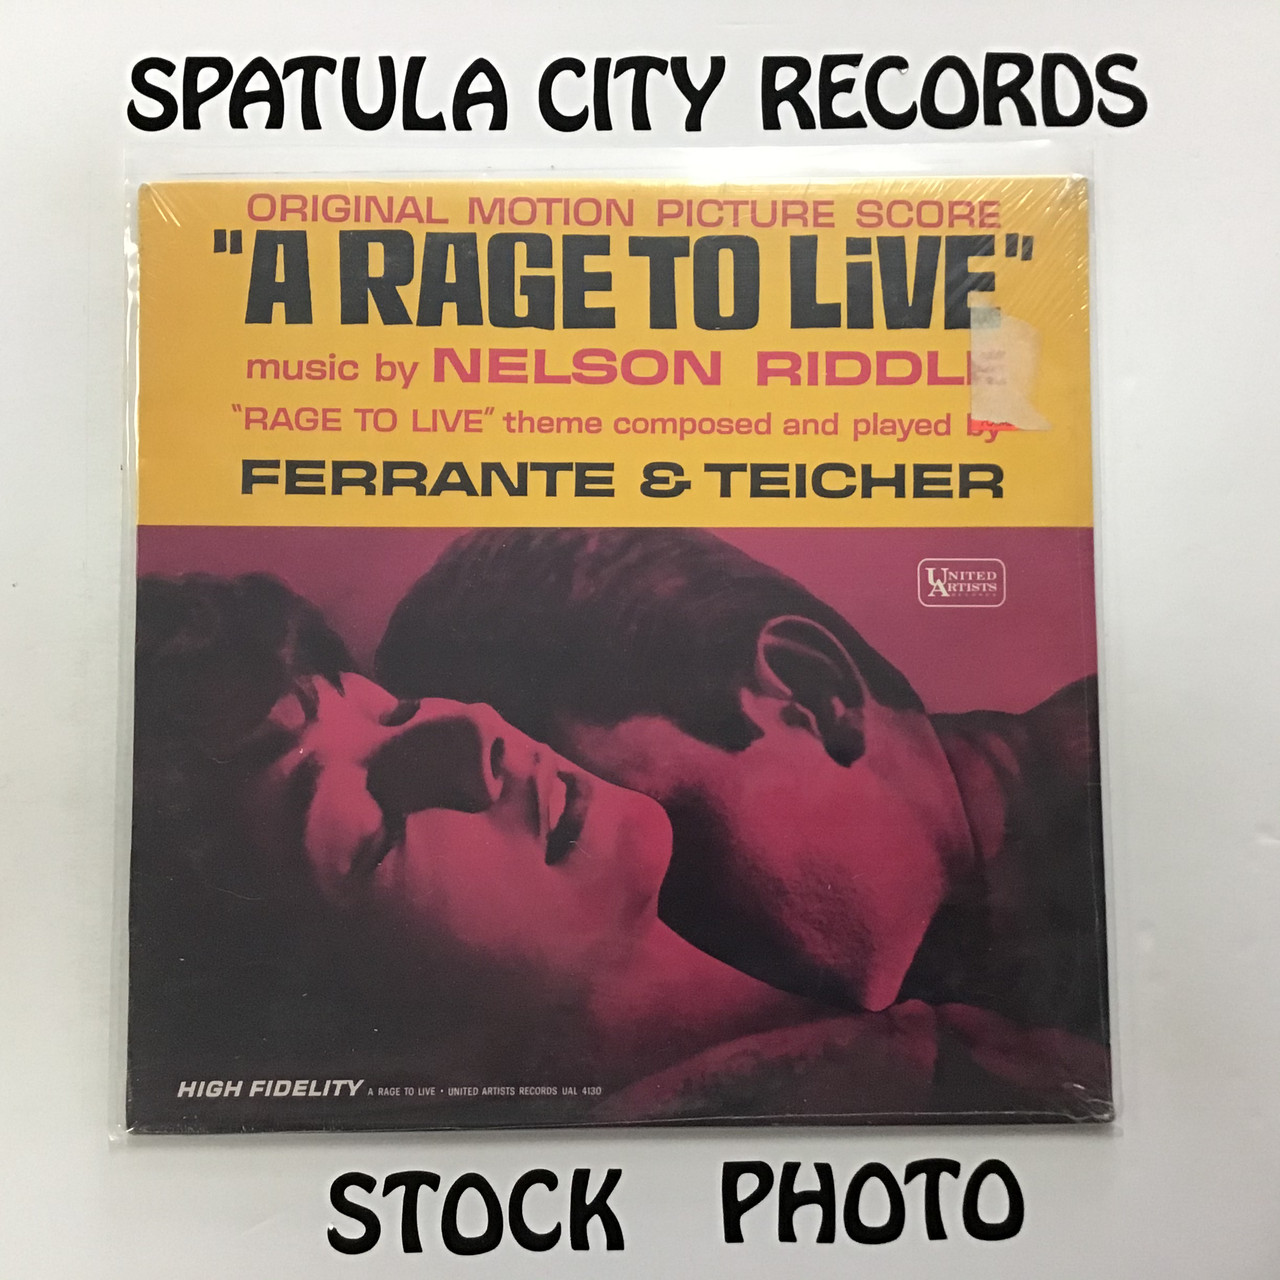 Nelson Riddle/Ferrante and Teicher - A Rage to Live - soundtrack - MONO - SEALED - vinyl record LP